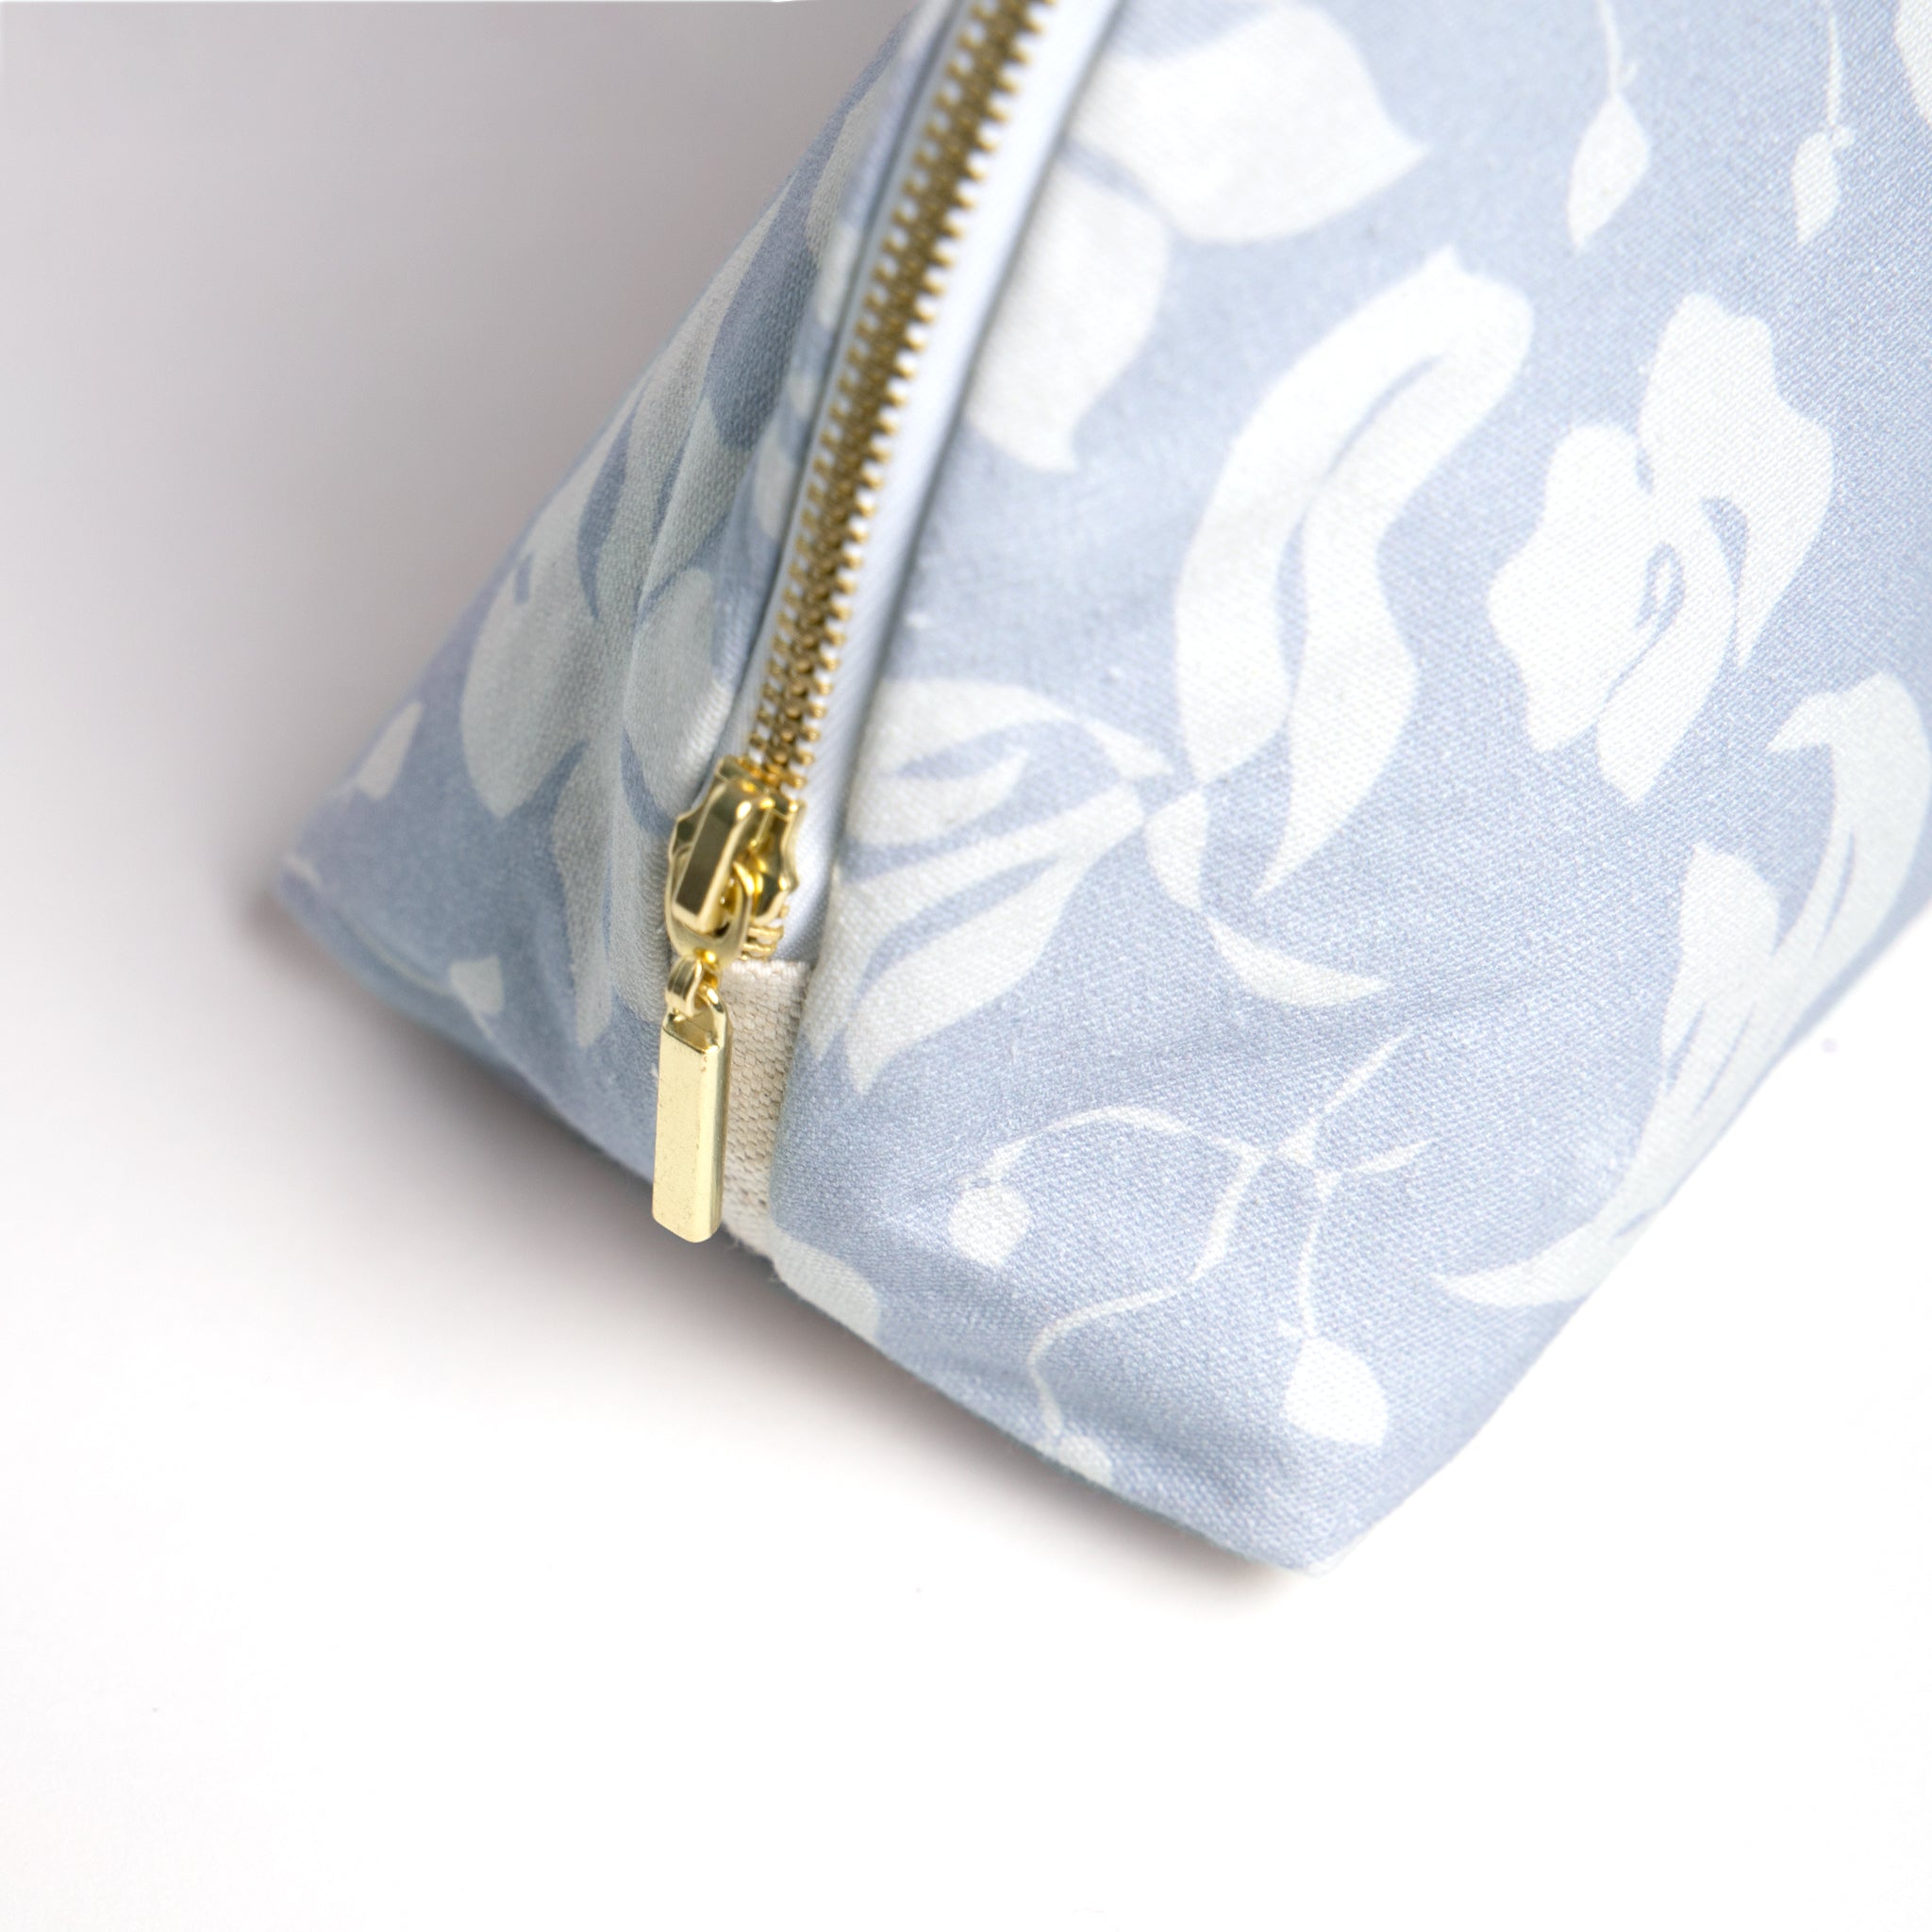 Close-Up of Cornflower Blue Floral Printed Pouch's Gold Zipper